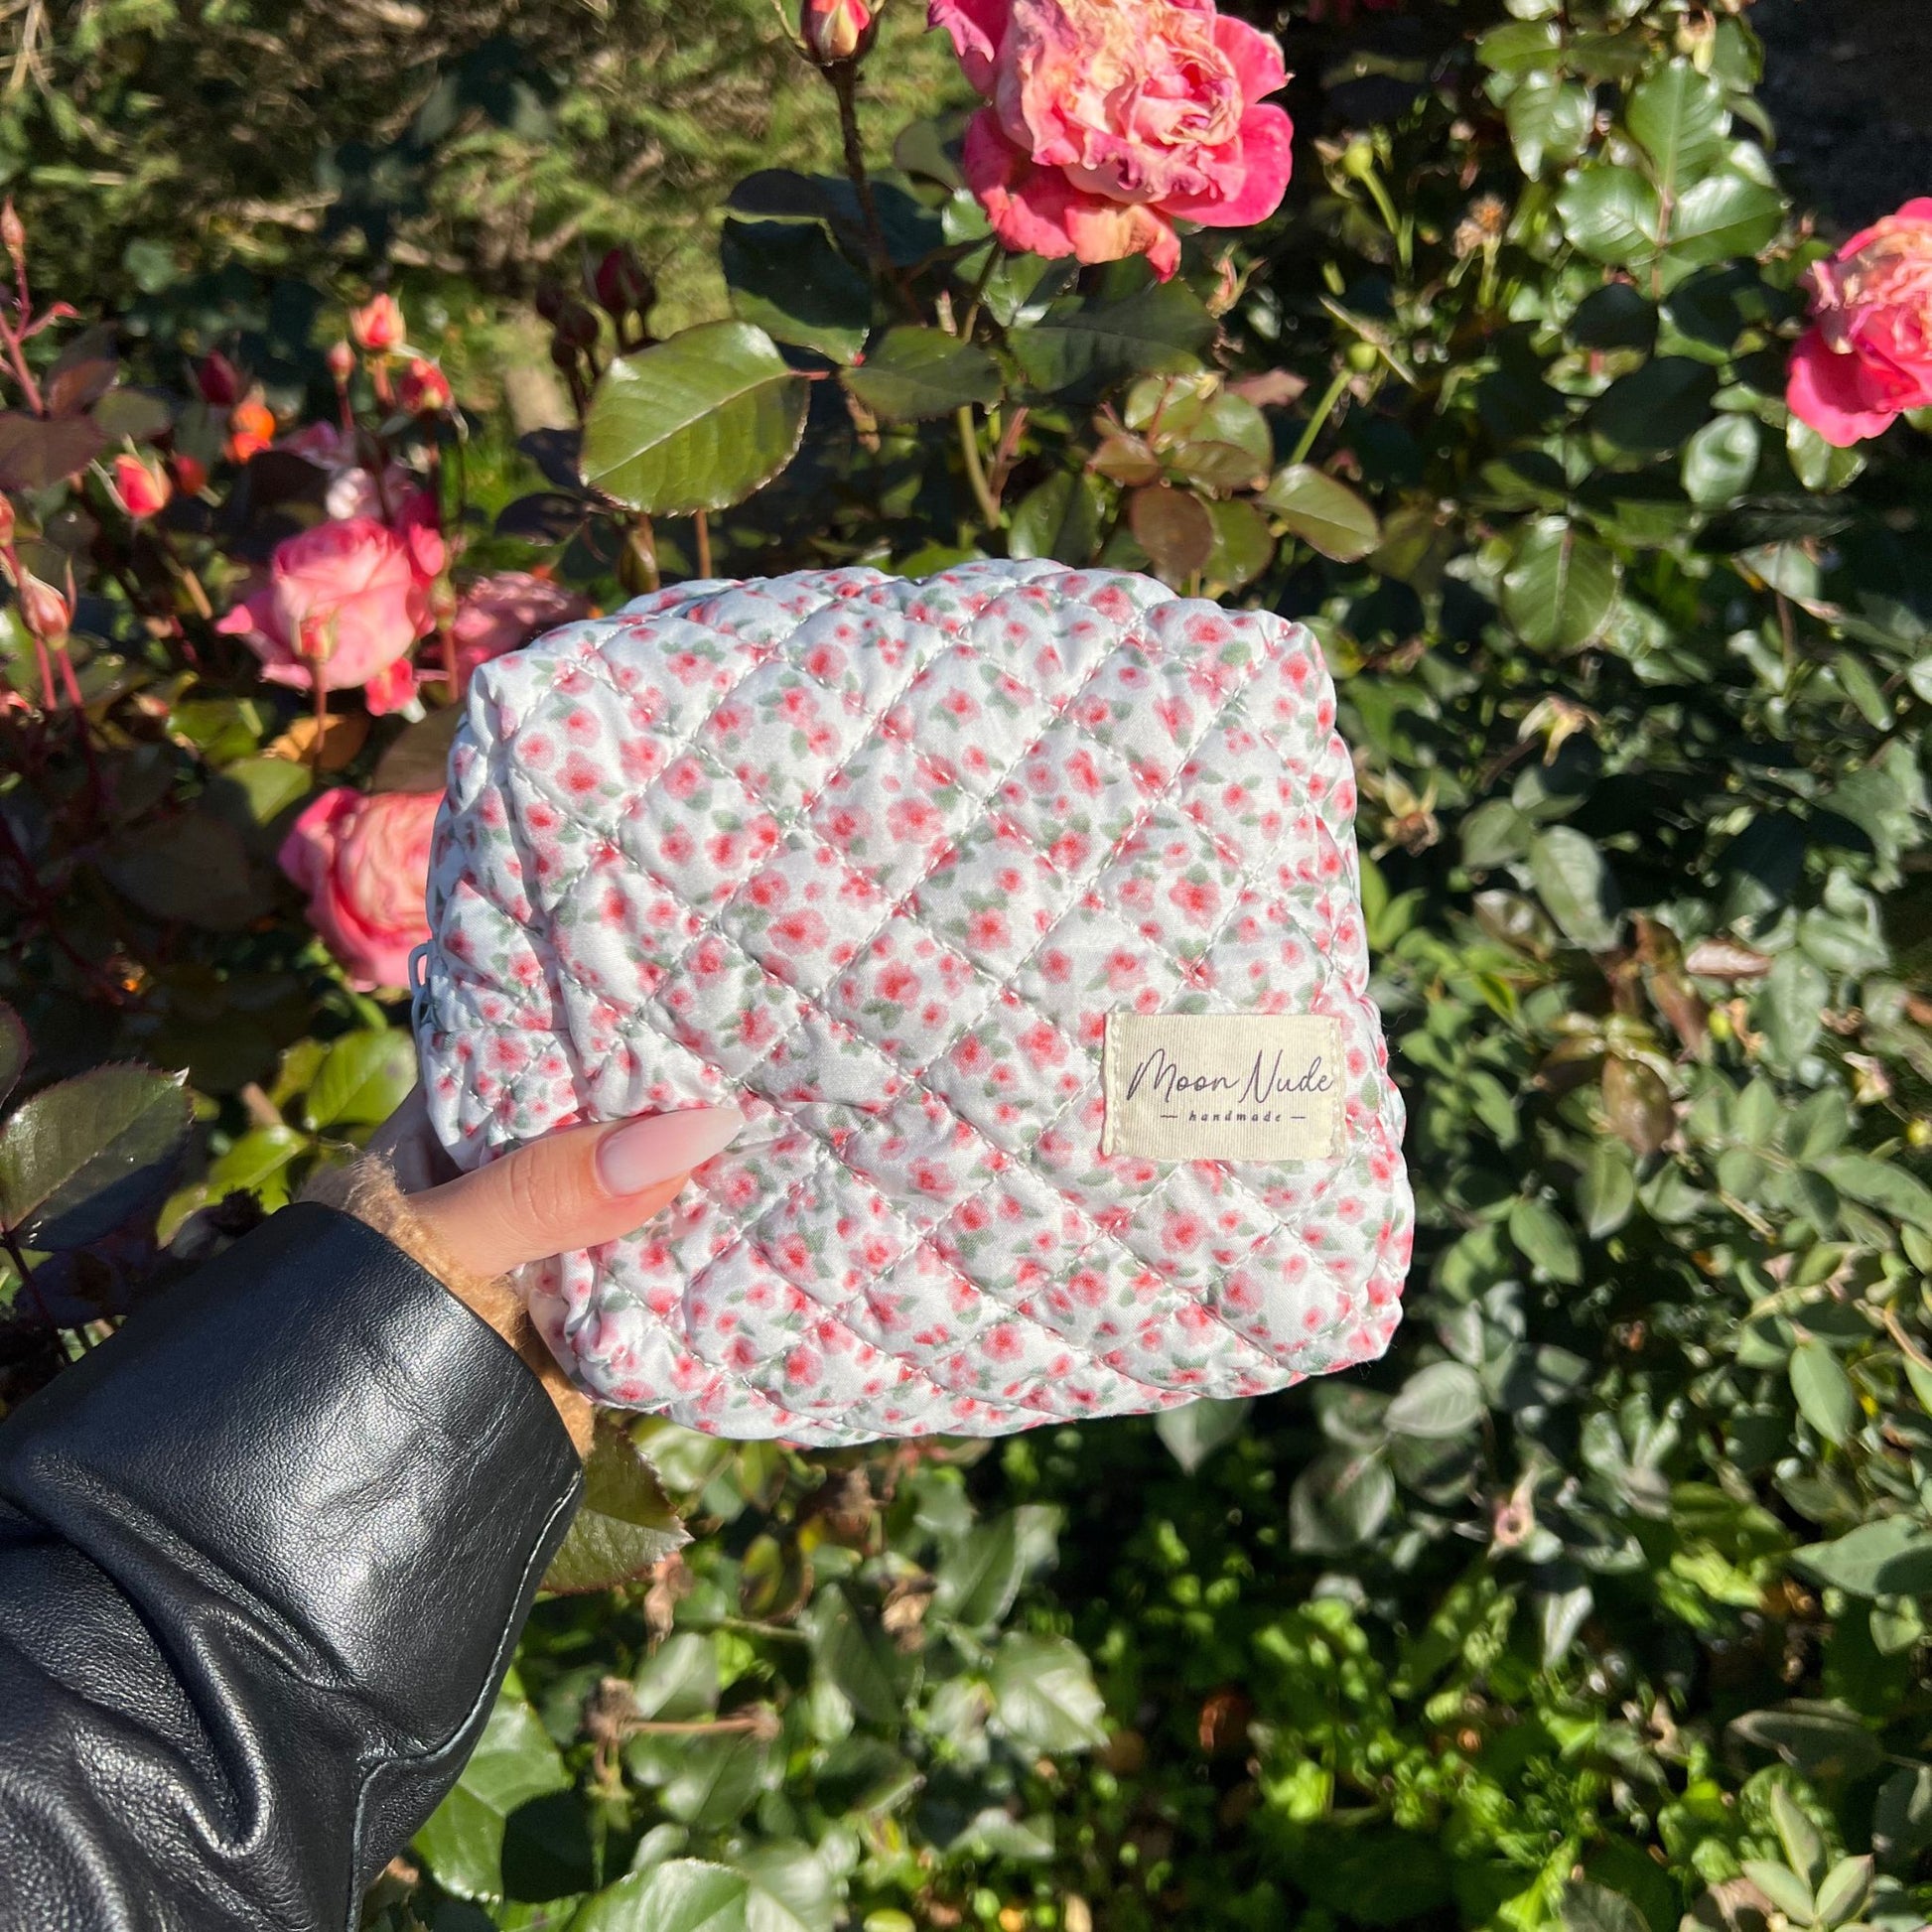 Unique extra large pencil case or makeup bag with Japanese peonies